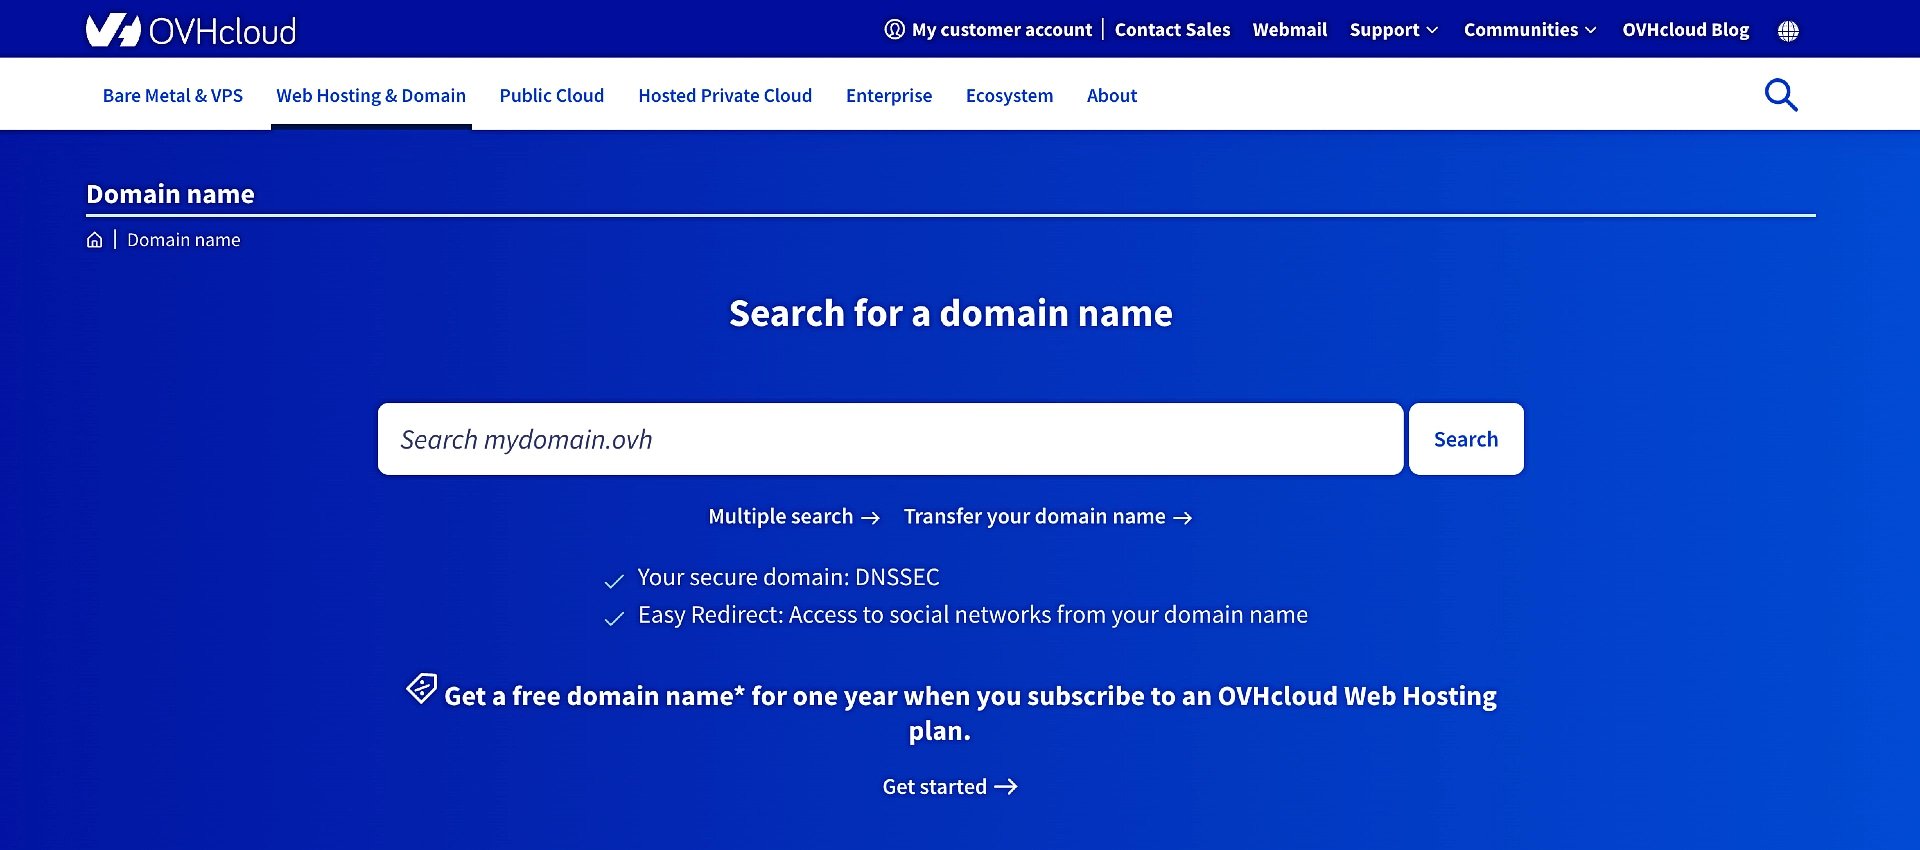 OVH domain search page.